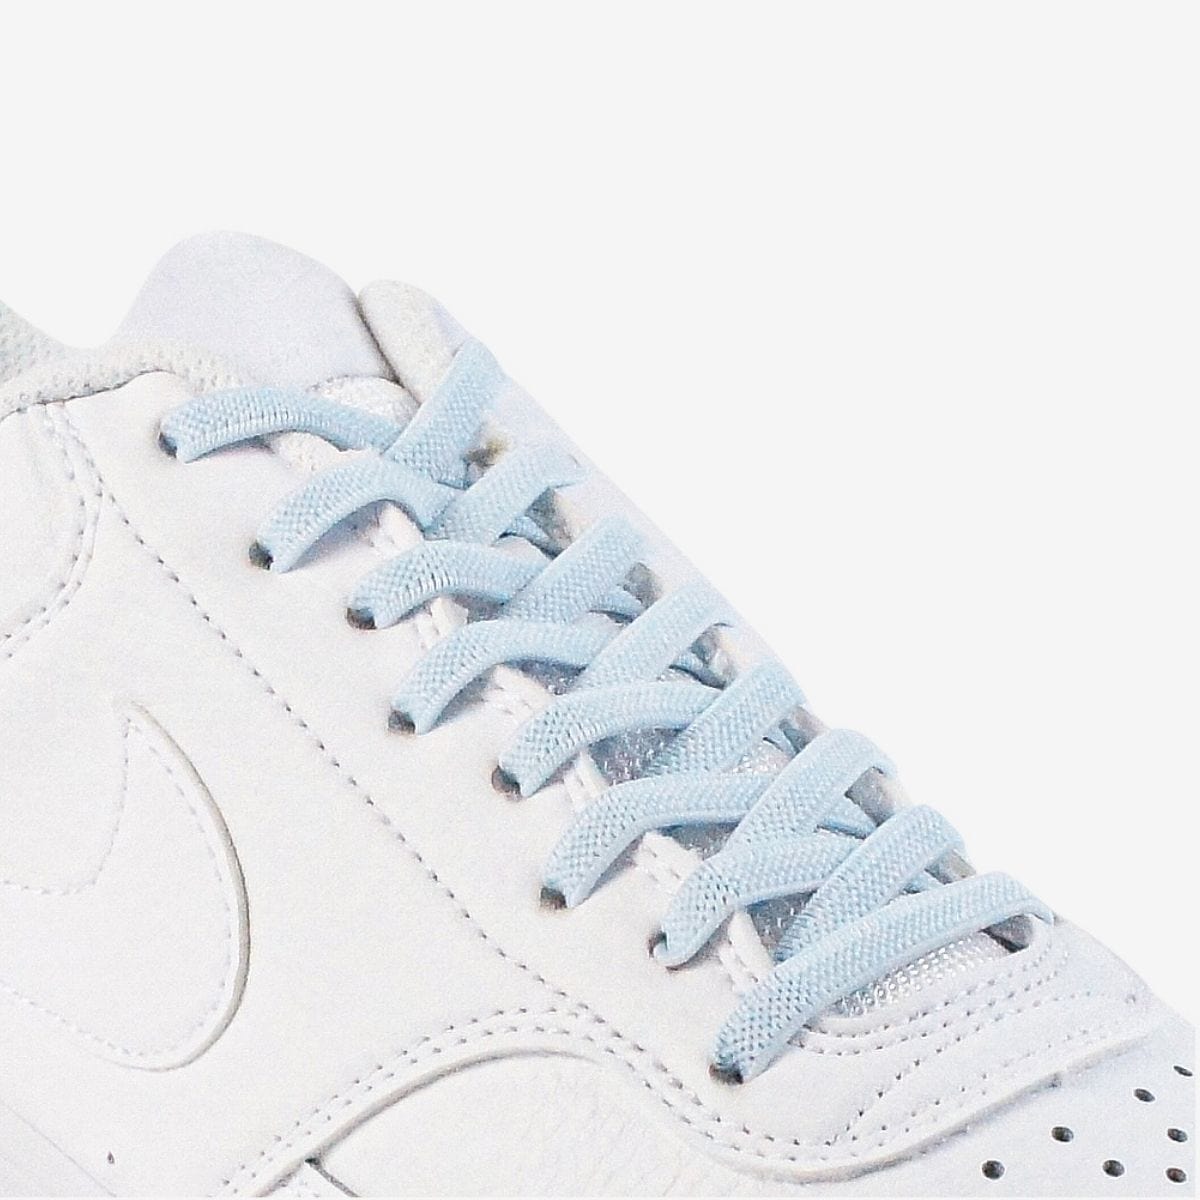 kids-no-tie-shoelaces-with-pastel-blue-laces-on-nike-white-sneakers-by-kicks-shoelaces